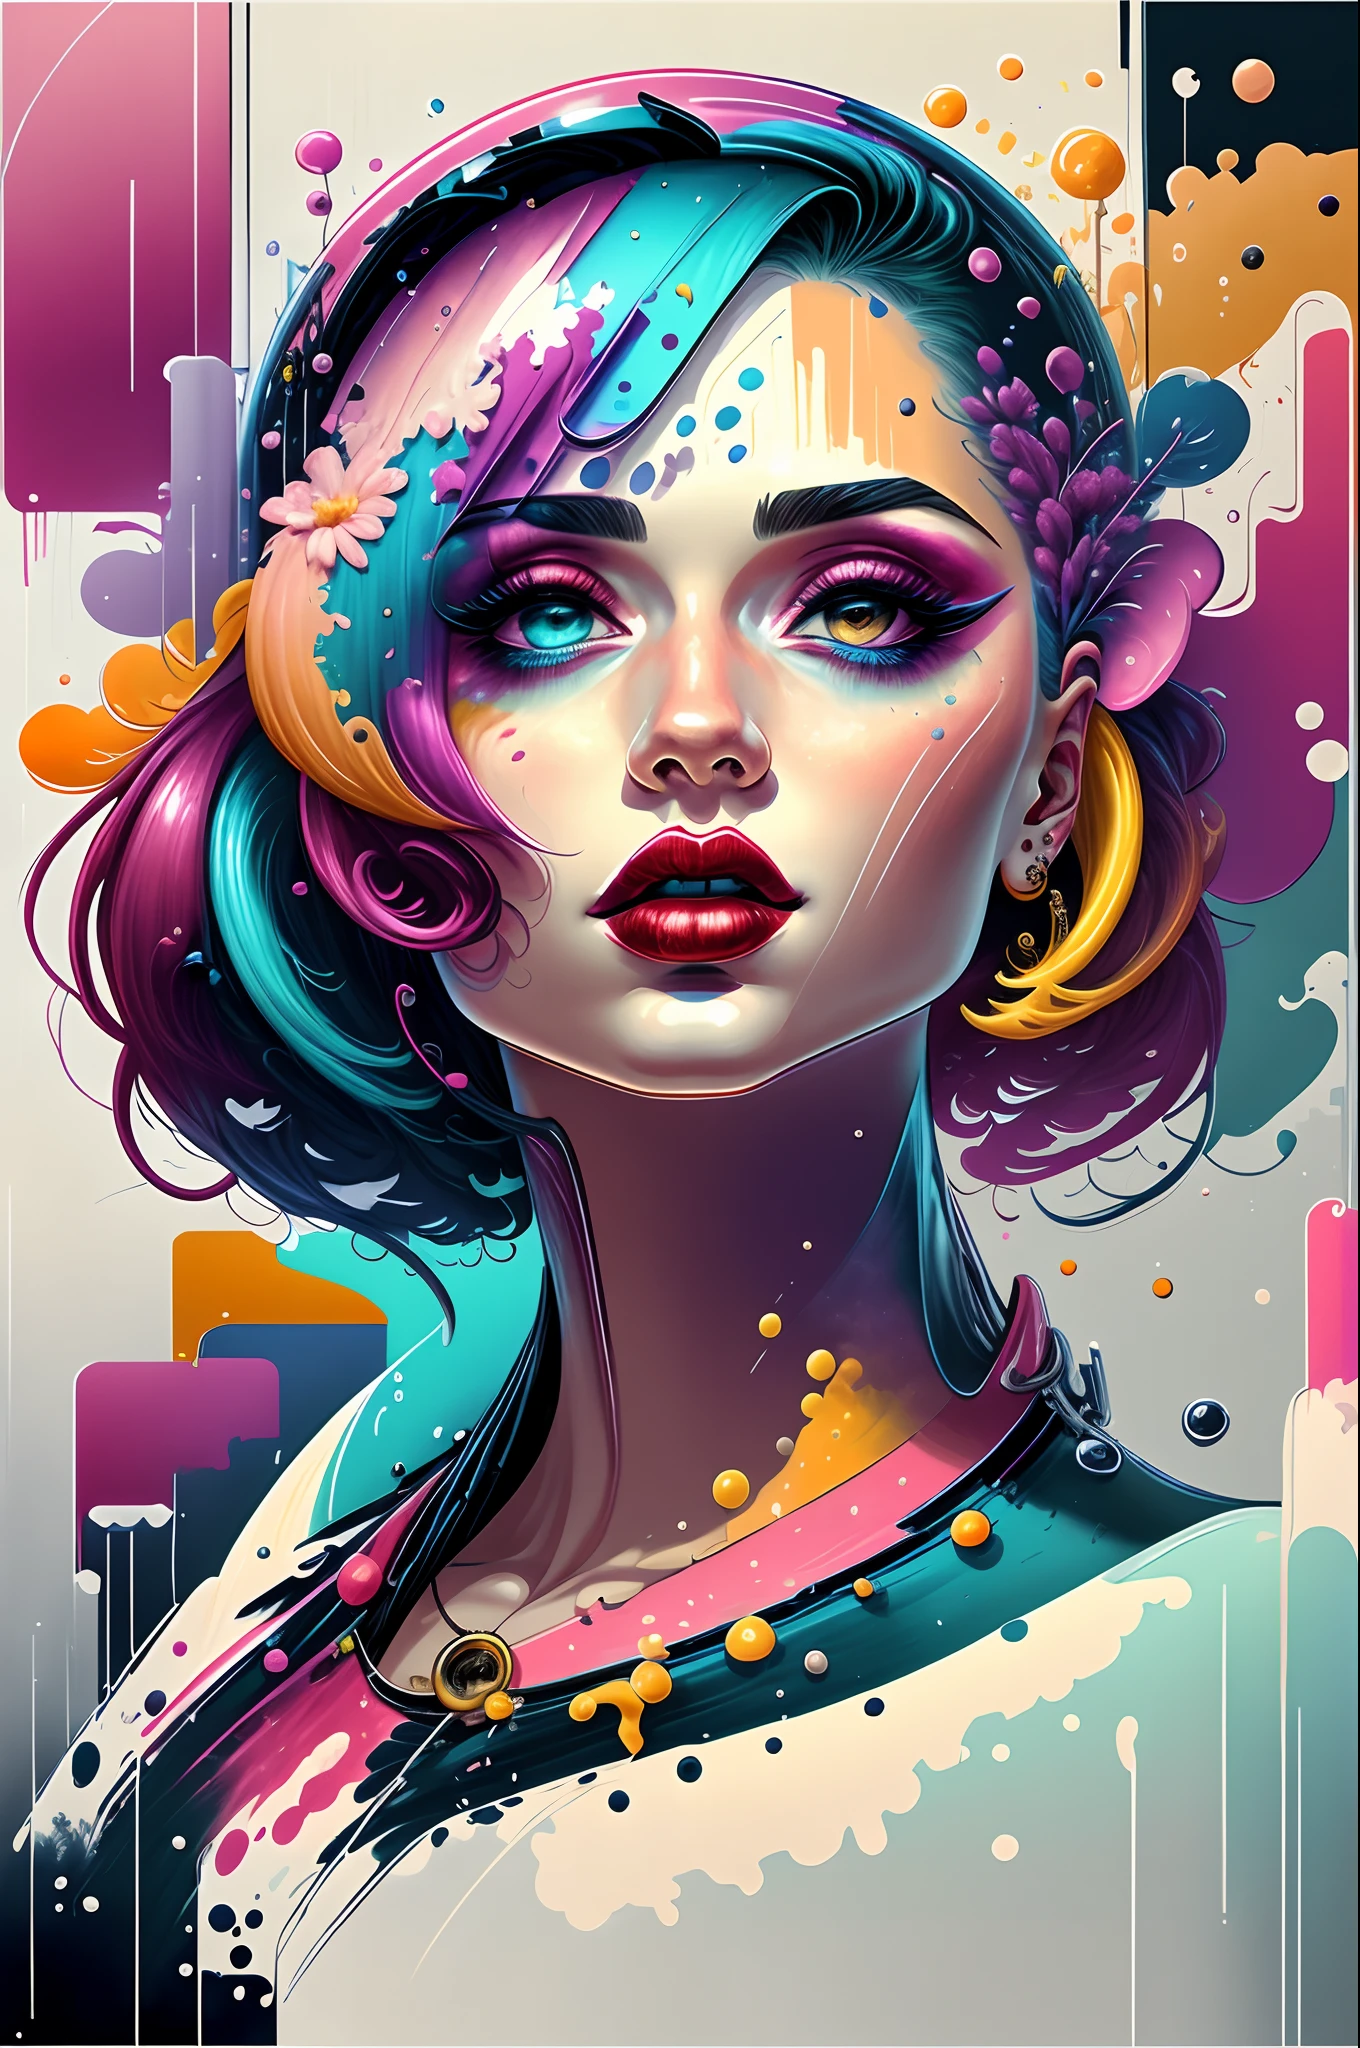 Create digital artworks in the pop art style, Featuring vibrant and confident women with bold makeup and colorful fashion, Cinematic color scheme, Surrounded by abstract floral patterns, Energetic brush strokes,The mood must be dynamic.